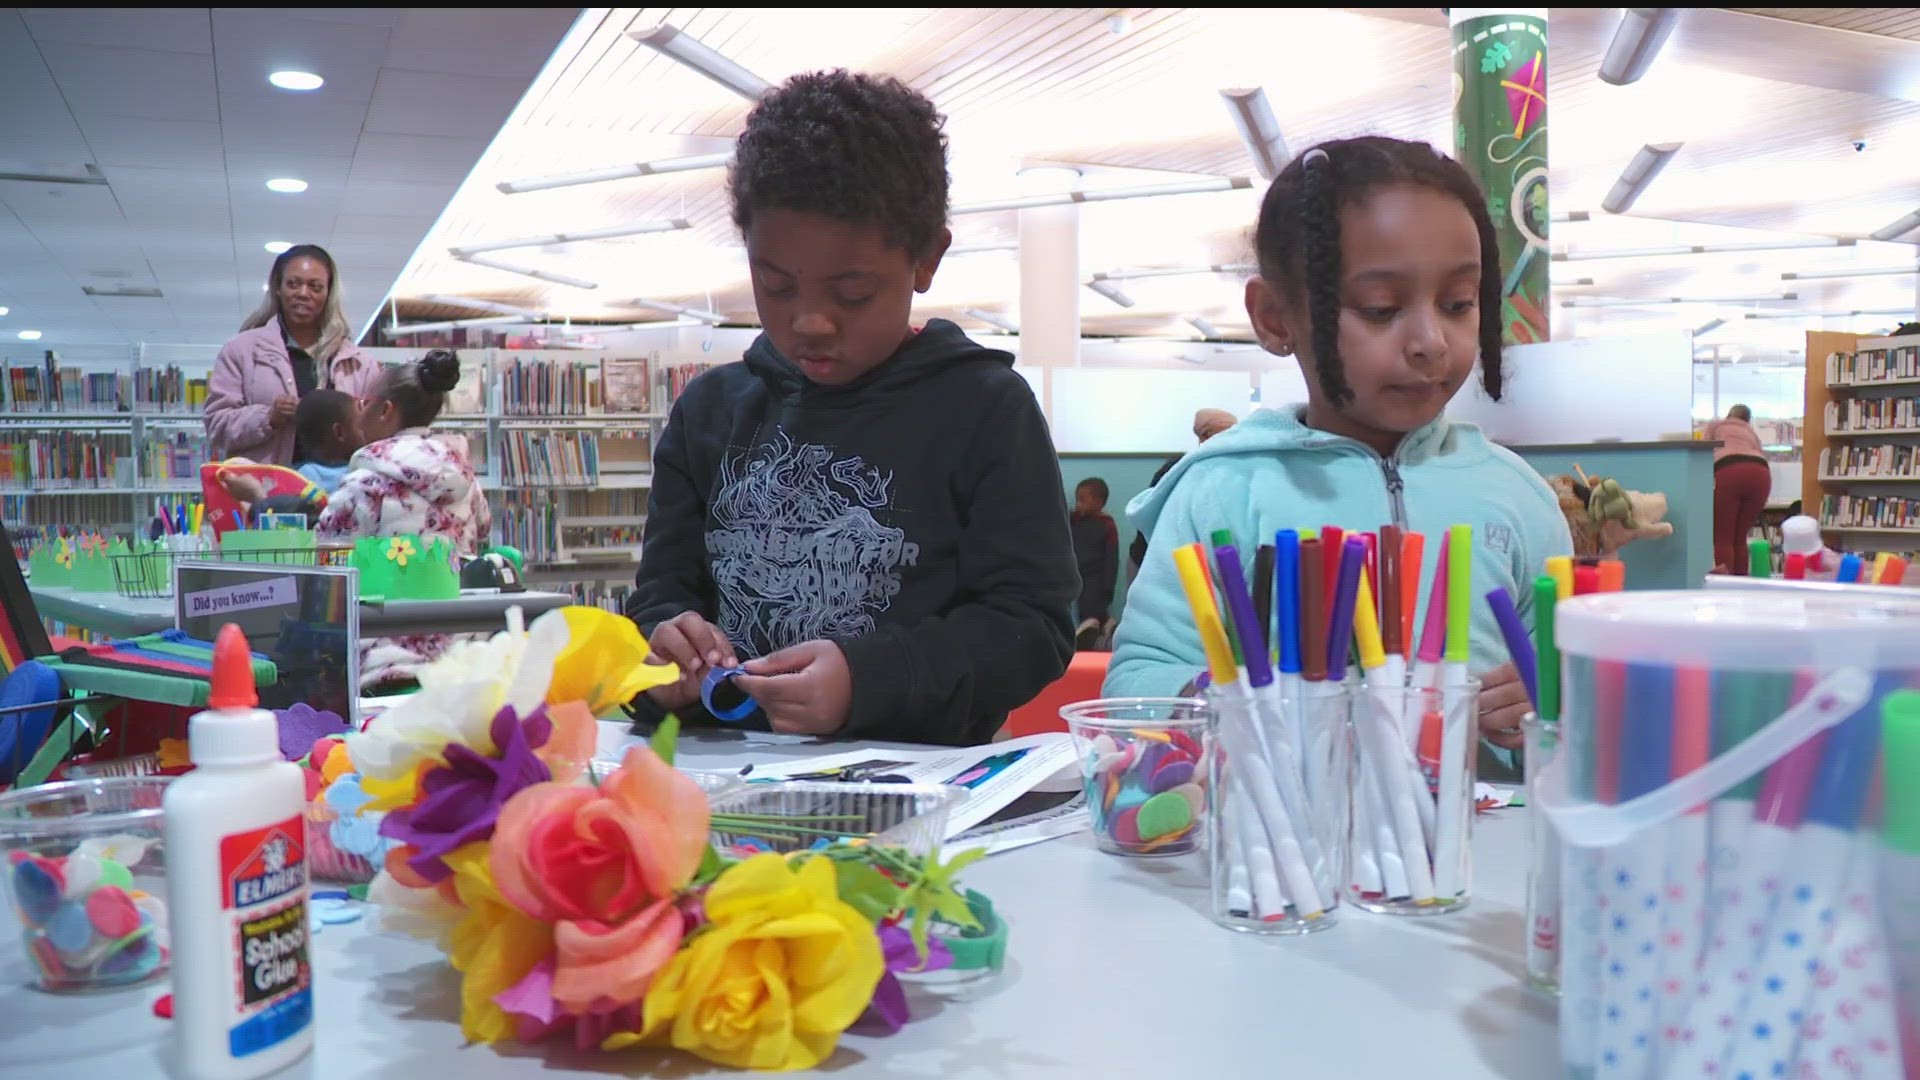 This is the third St. Paul Public Library to redesign its children's area in recent years.